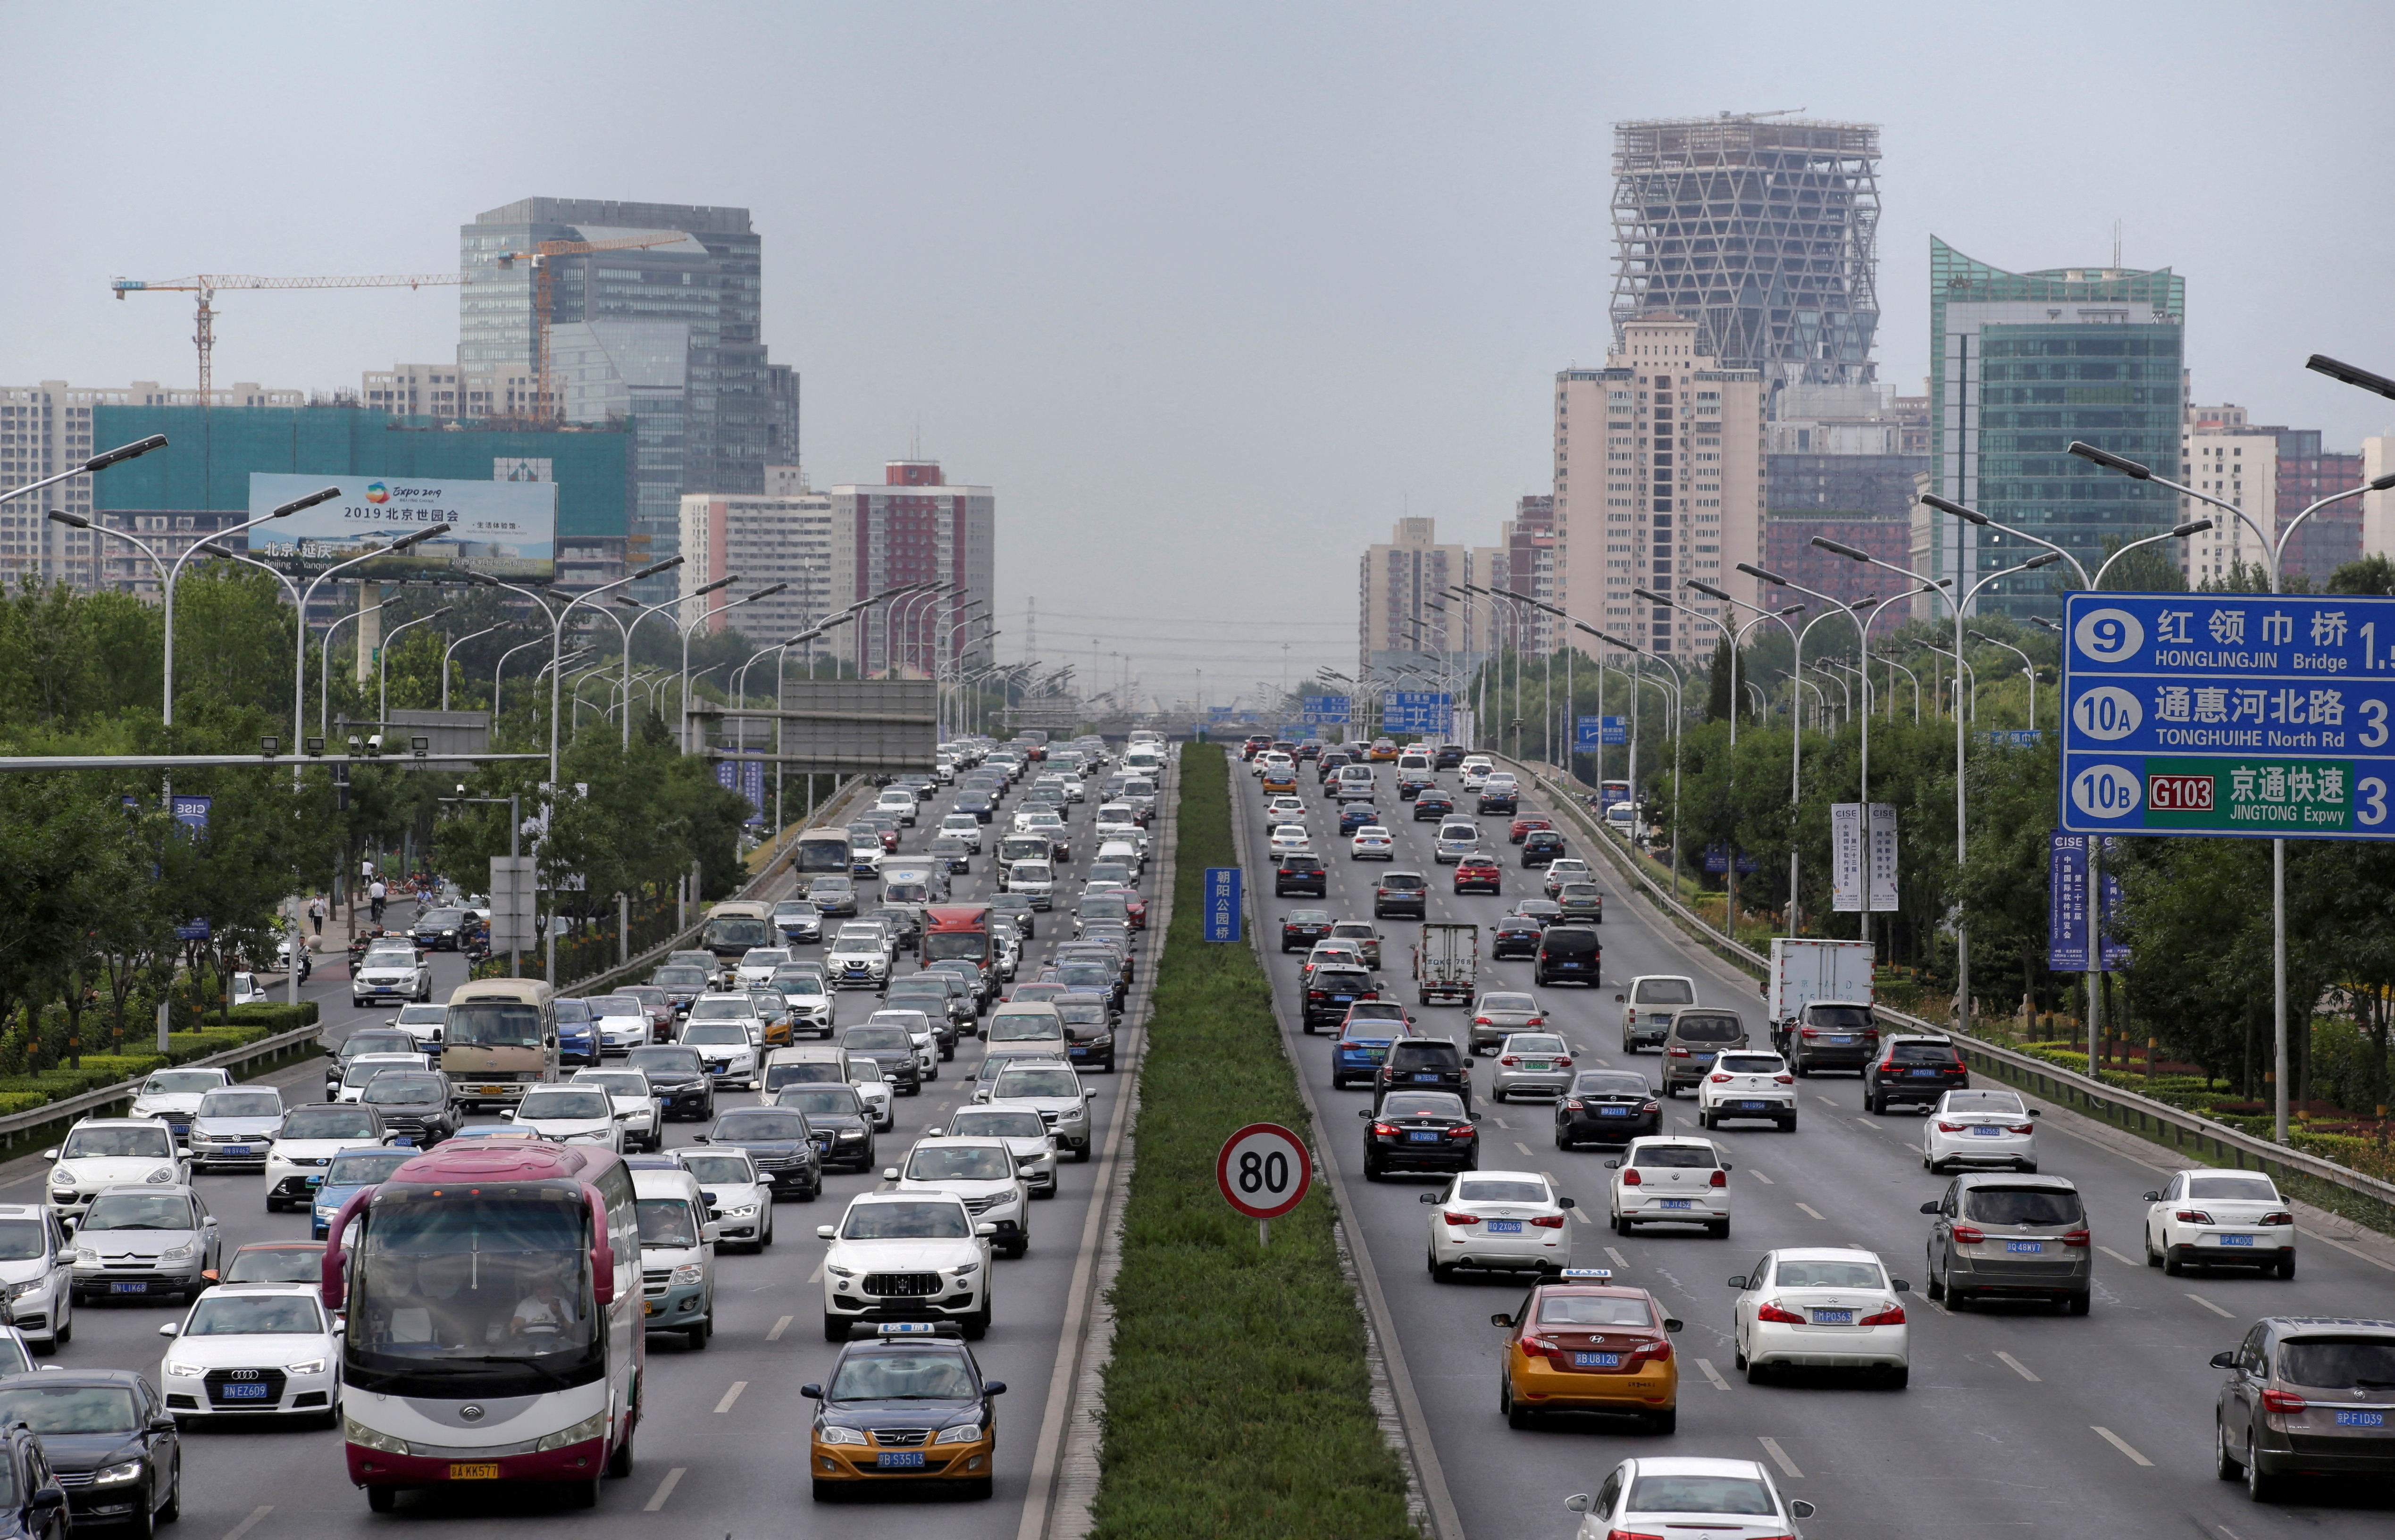 Cars drive on the road during the morning rush hour in Beijing